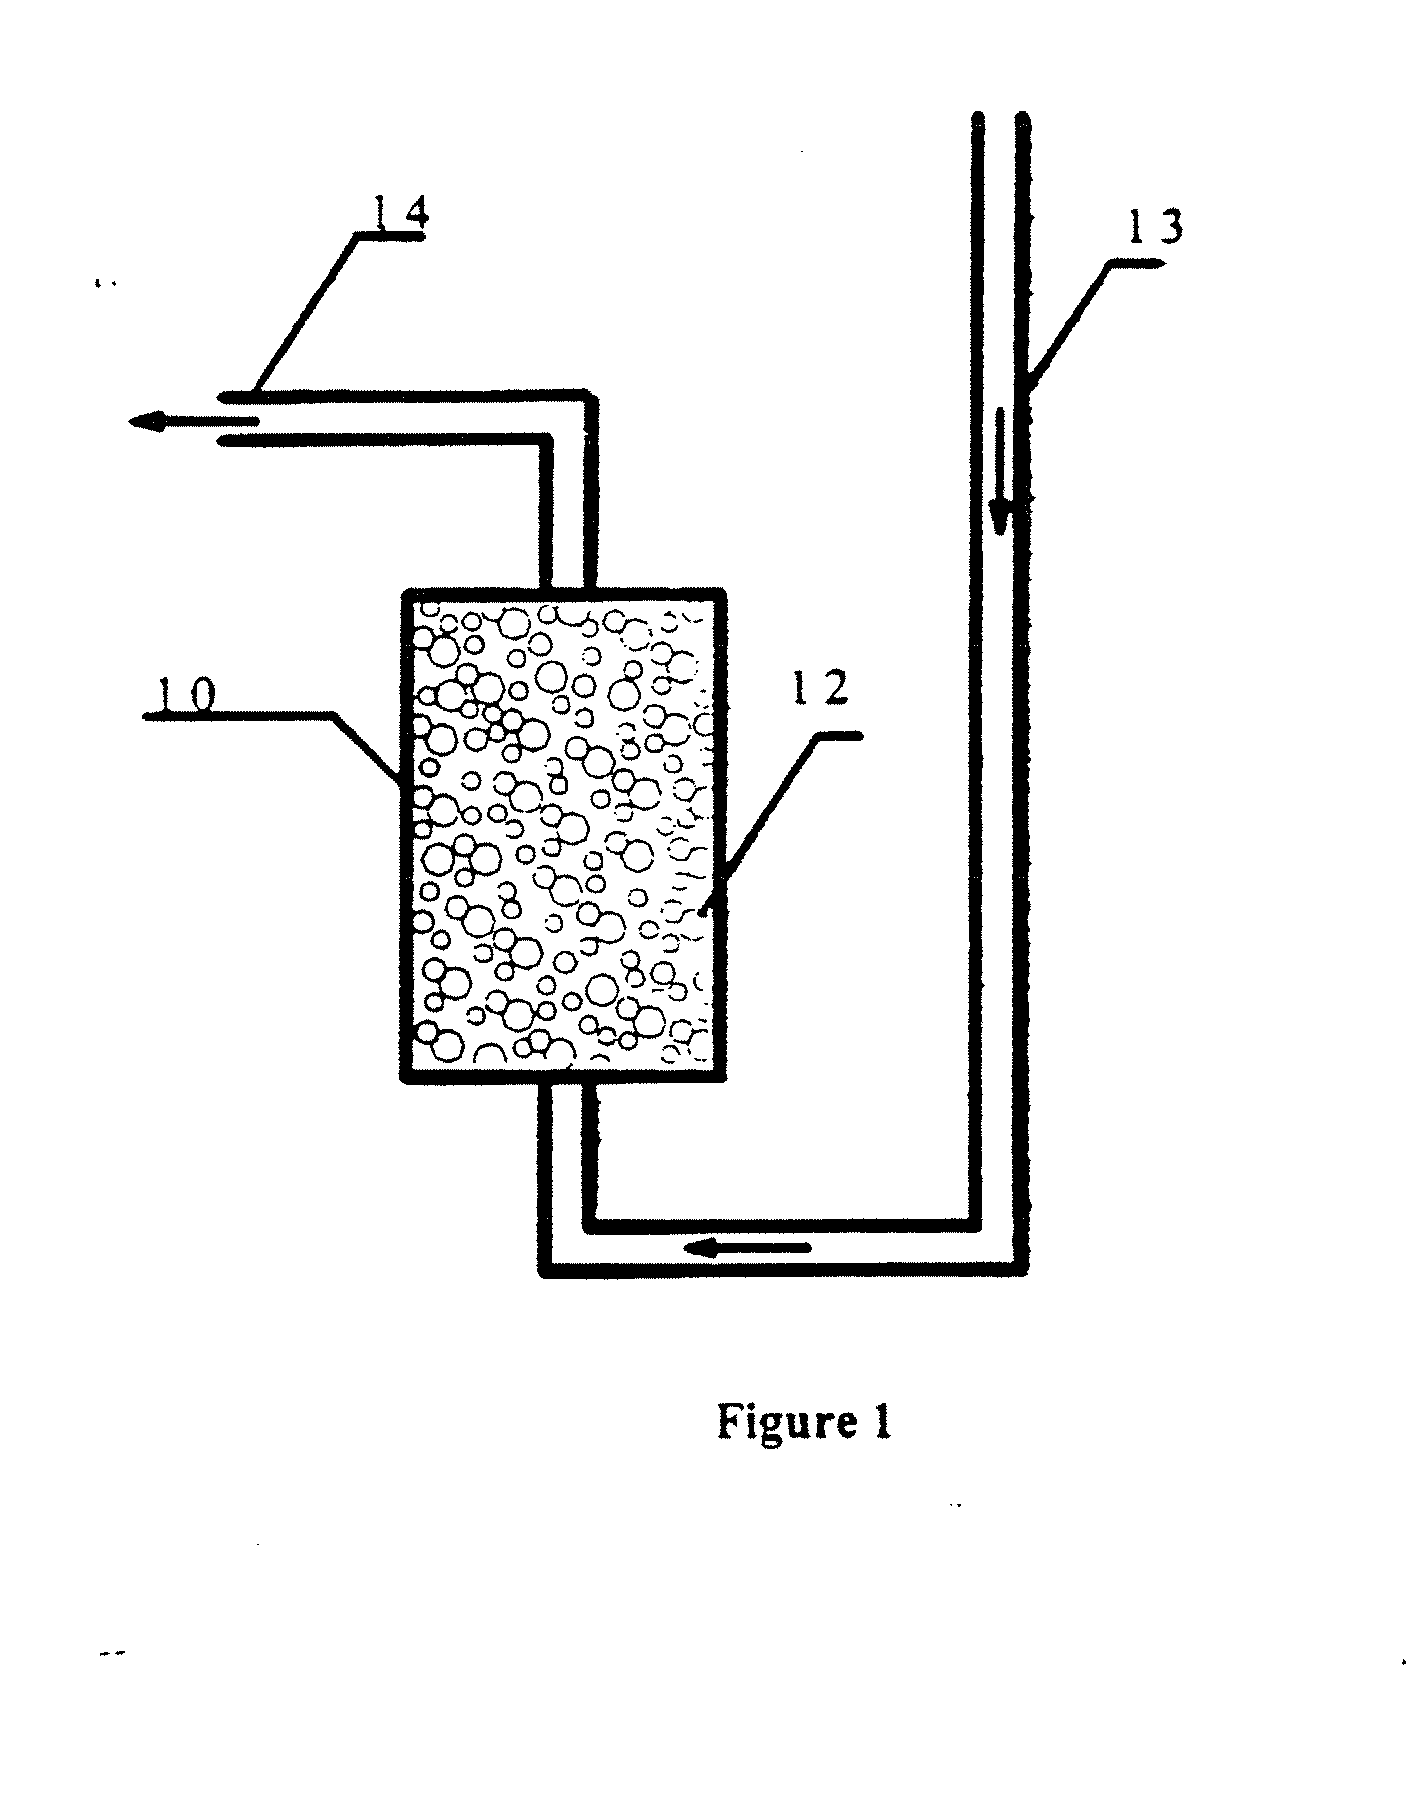 Clarification and Sorptive-Filtration System for the Capture of Constituents and Particulate Matter in Liquids and Gases